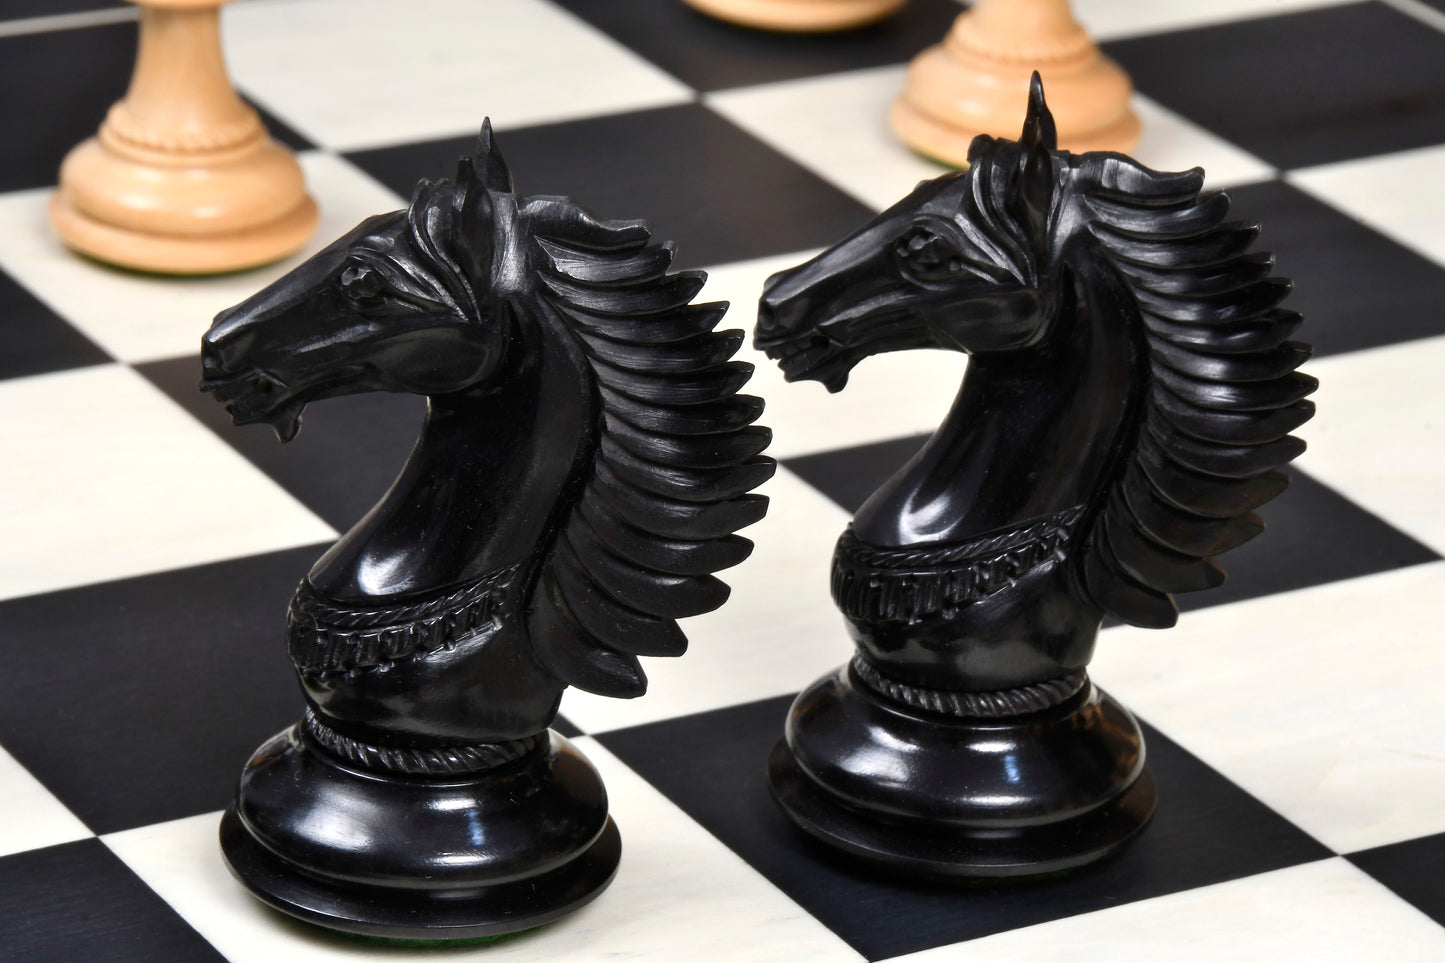 The CB Mustang Series Wooden Triple Weighted Chess Pieces in Ebony / Box Wood - 4.4" King